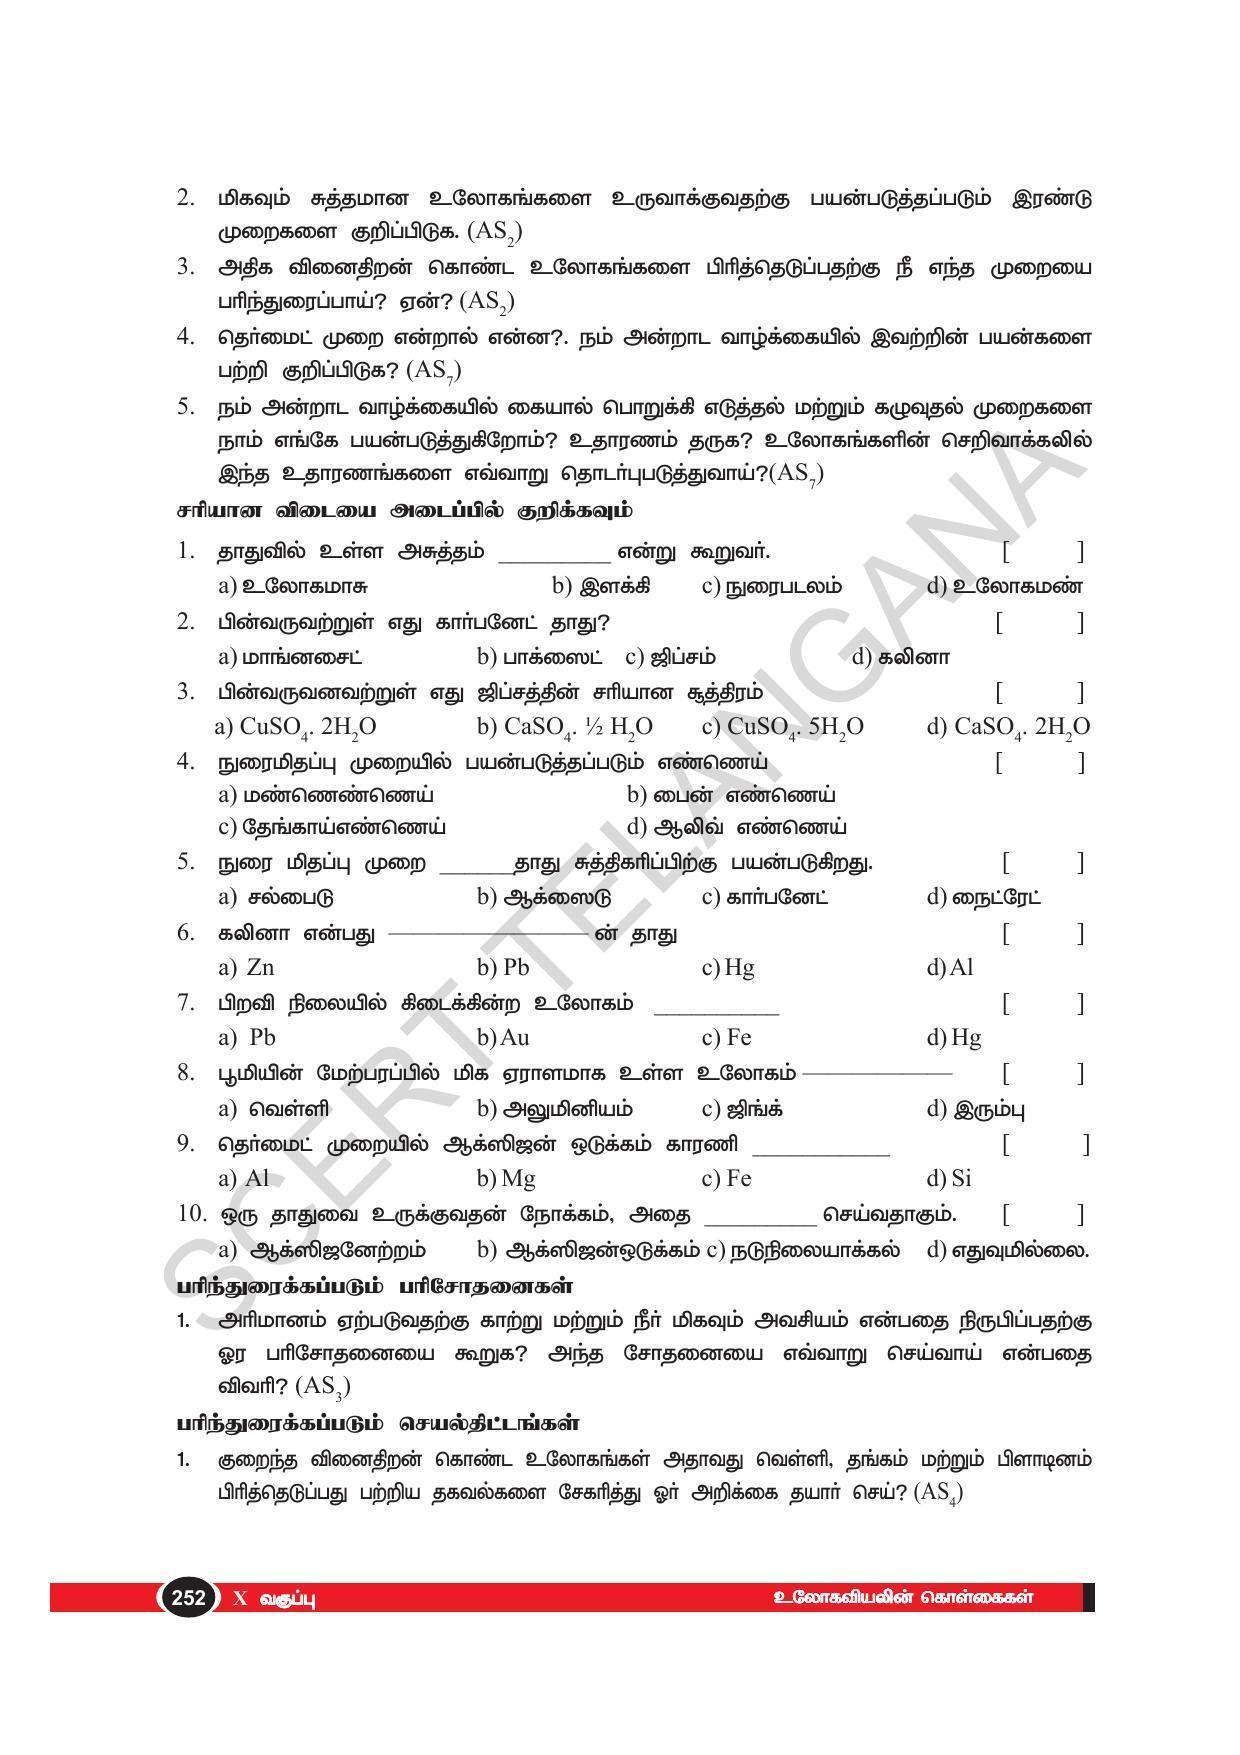 TS SCERT Class 10 Physical Science(Tamil Medium) Text Book - Page 264